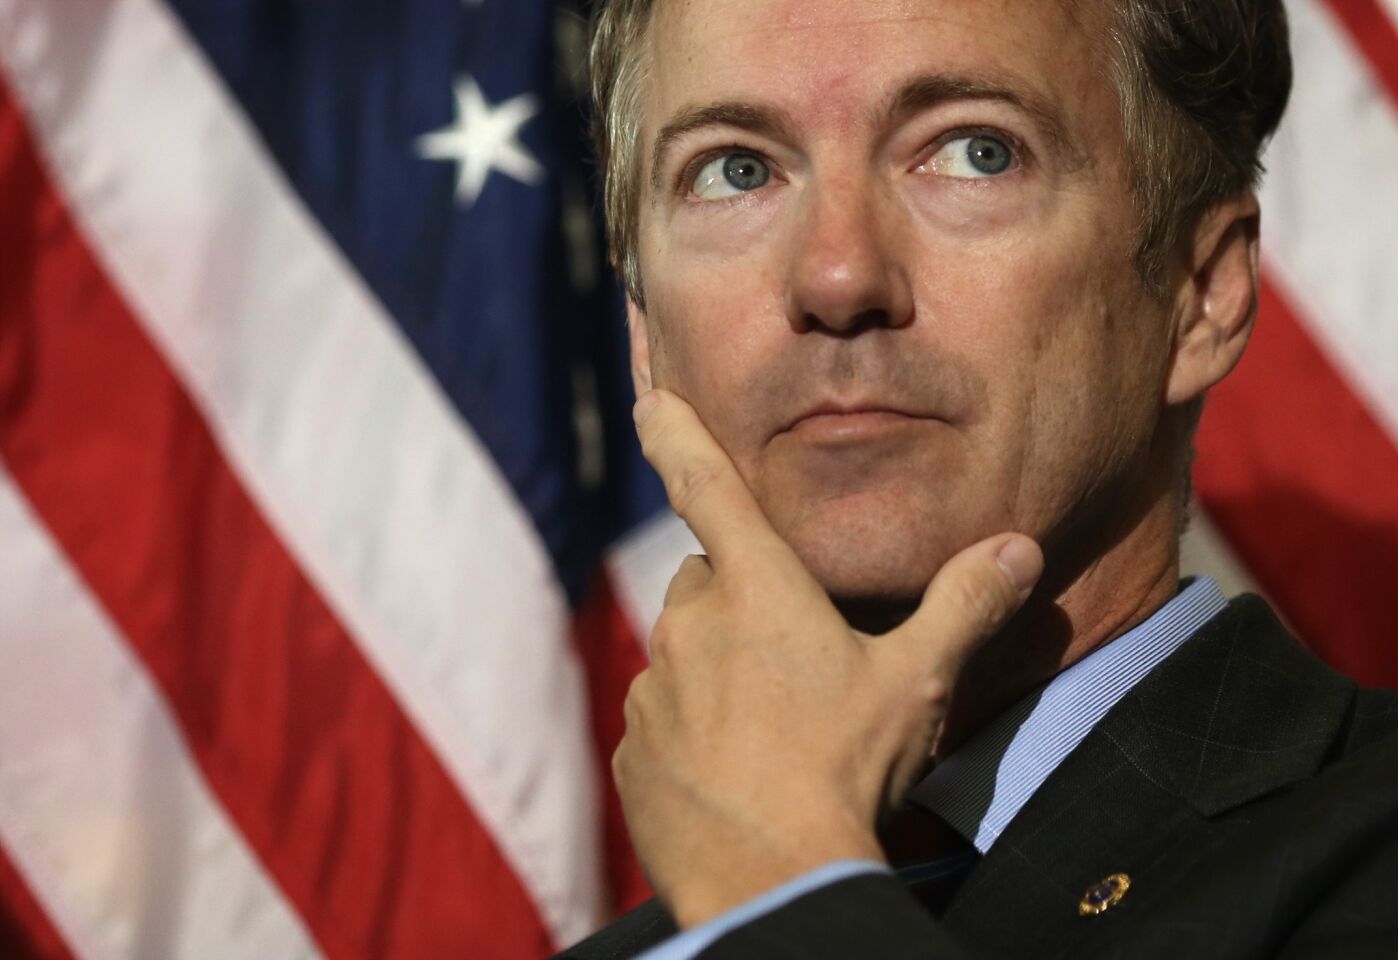 Sen. Rand Paul's (R-Ky.) profile has been on the rise, speaking out against the Obama administration's drone and surveillance policies. Tapping into his father's libertarian base, the first-term senator placed first in the 2014 CPAC straw poll.